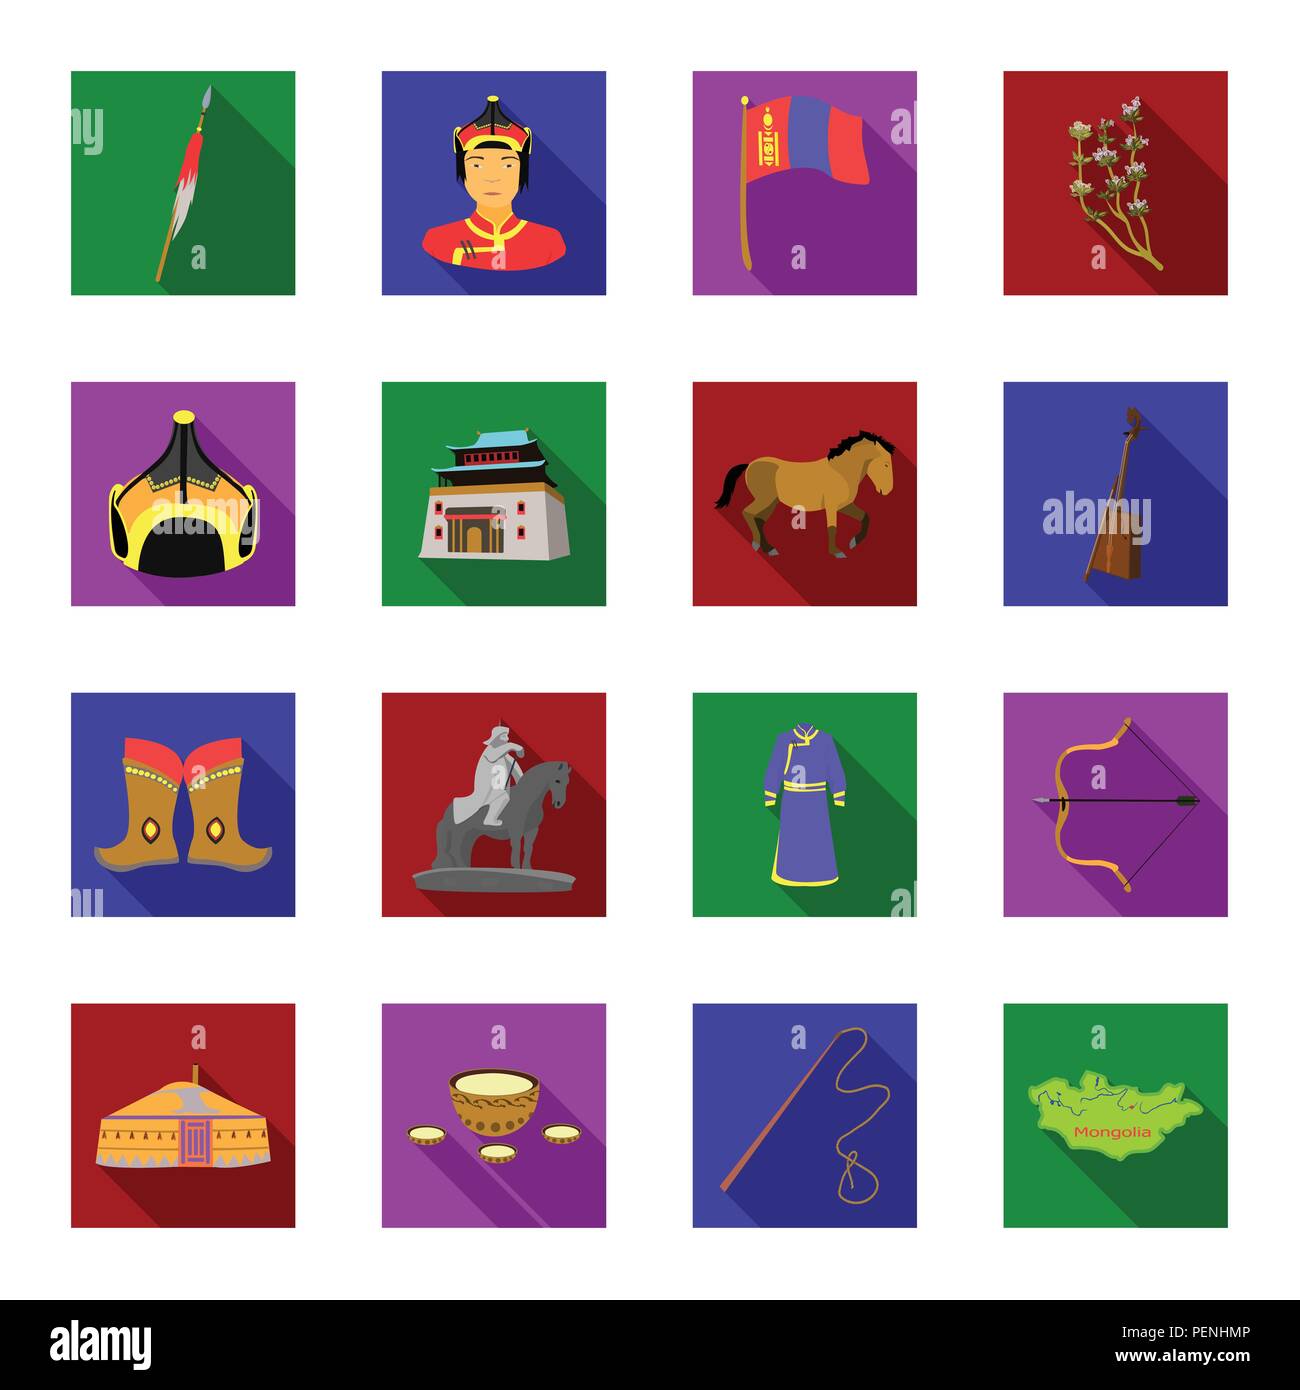 arms,arrow,belt,bow,buddhism,building,cashmere,coat,collection,country,culture,flag,flat,flower,fur,genghis,gutuly,headdress,horse,hudak,icon,illustration,instrument,khan,kialis,kumis,landmark,leather,map,monastery,mongol,mongolia,monument,musical,nature,religion,robe,set,shoes,sign,spear,temple,territory,tradition,travel,vector,whip,wool,yurt Vector Vectors , Stock Vector